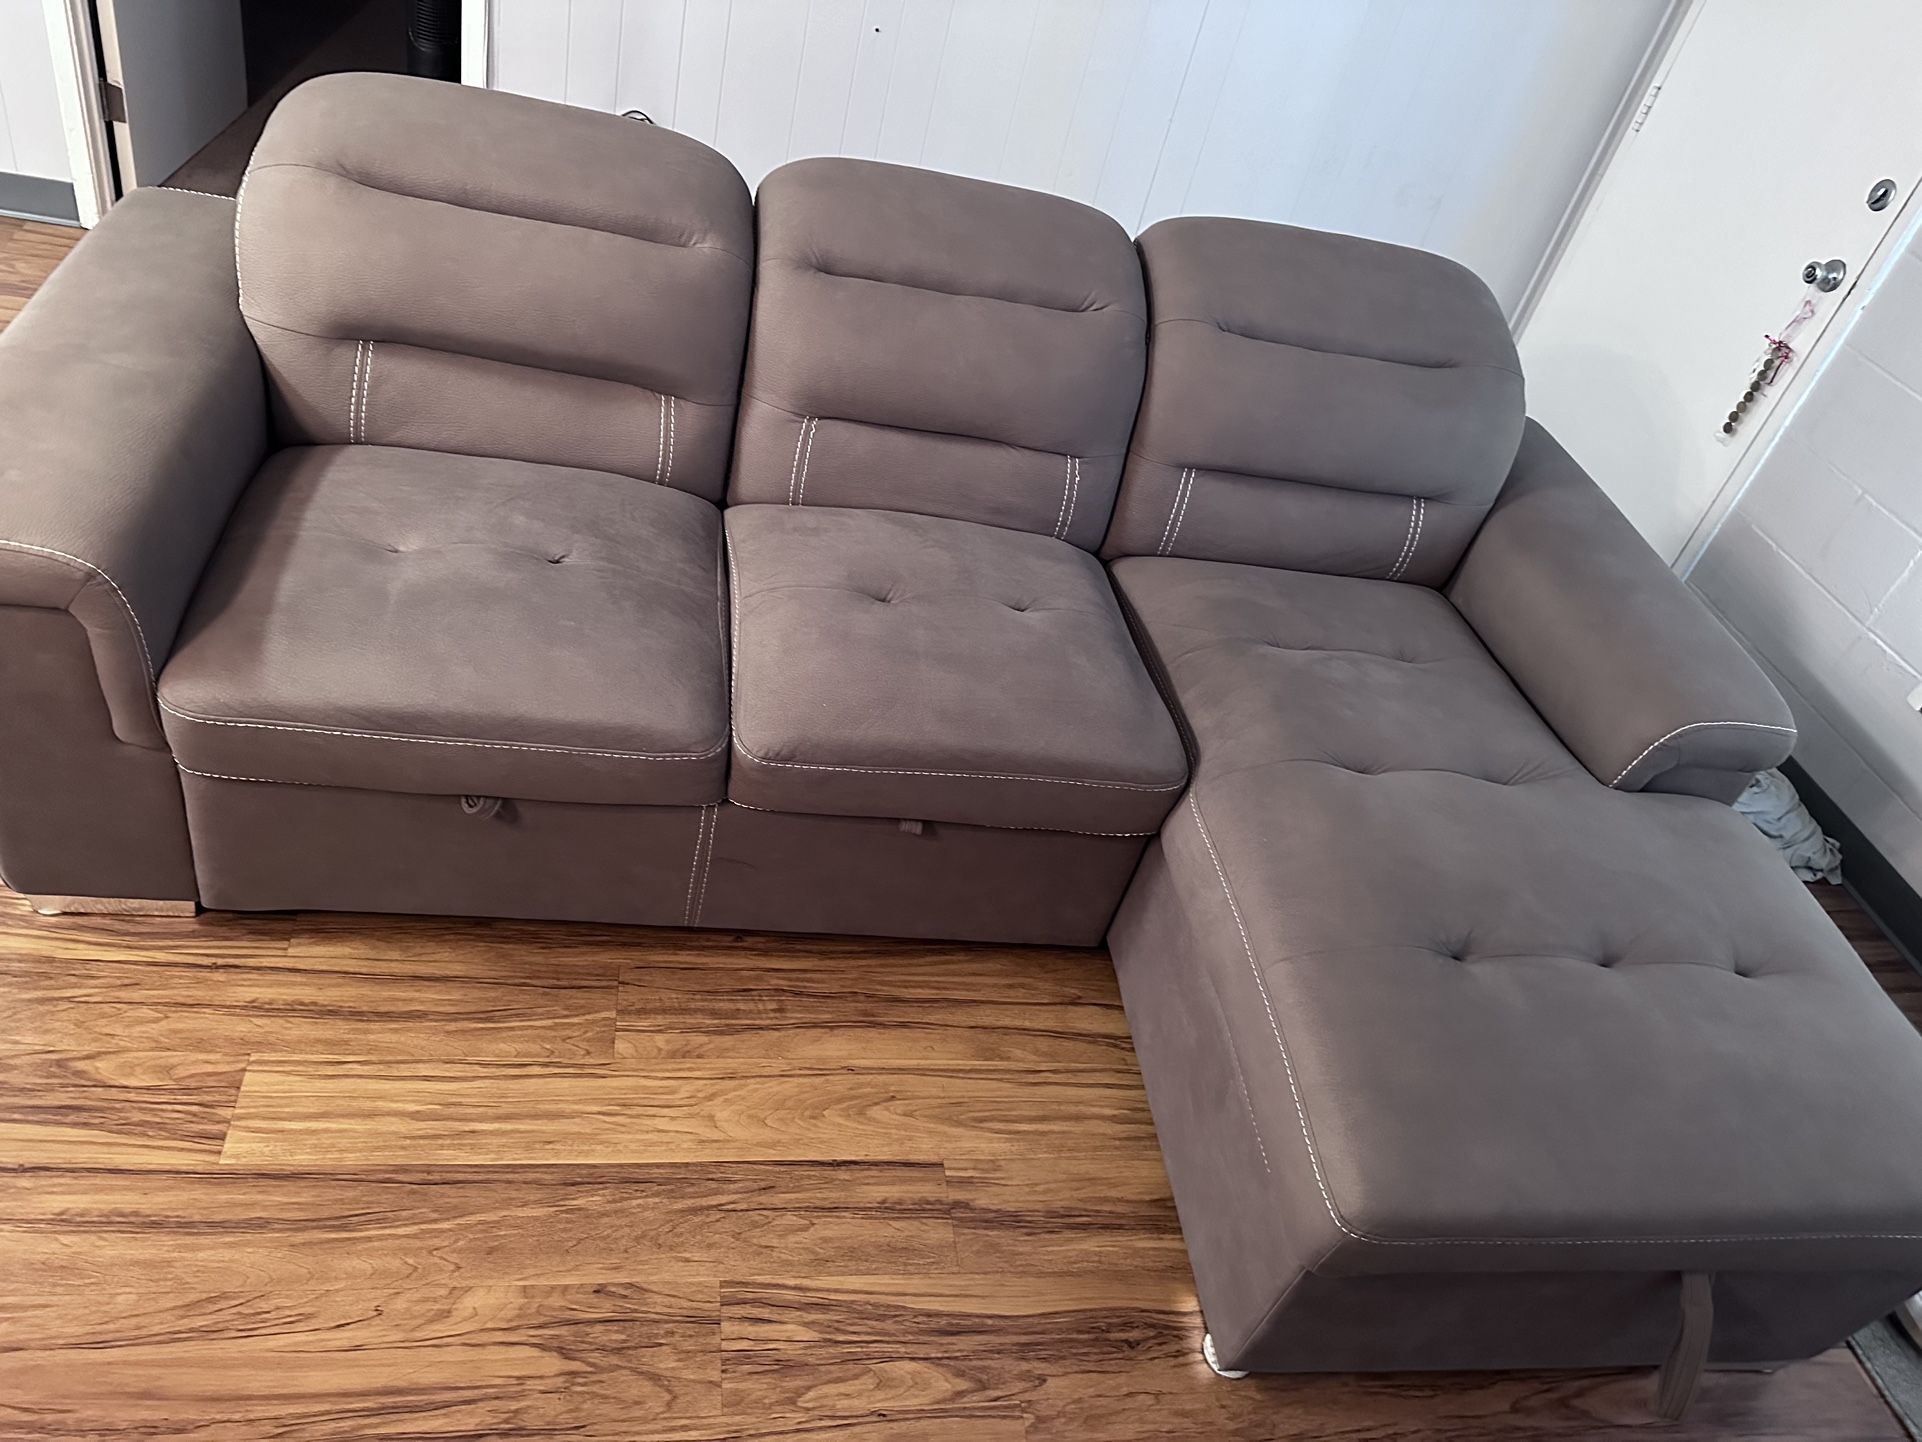 Sofa L Shape Couch In Good Condition 